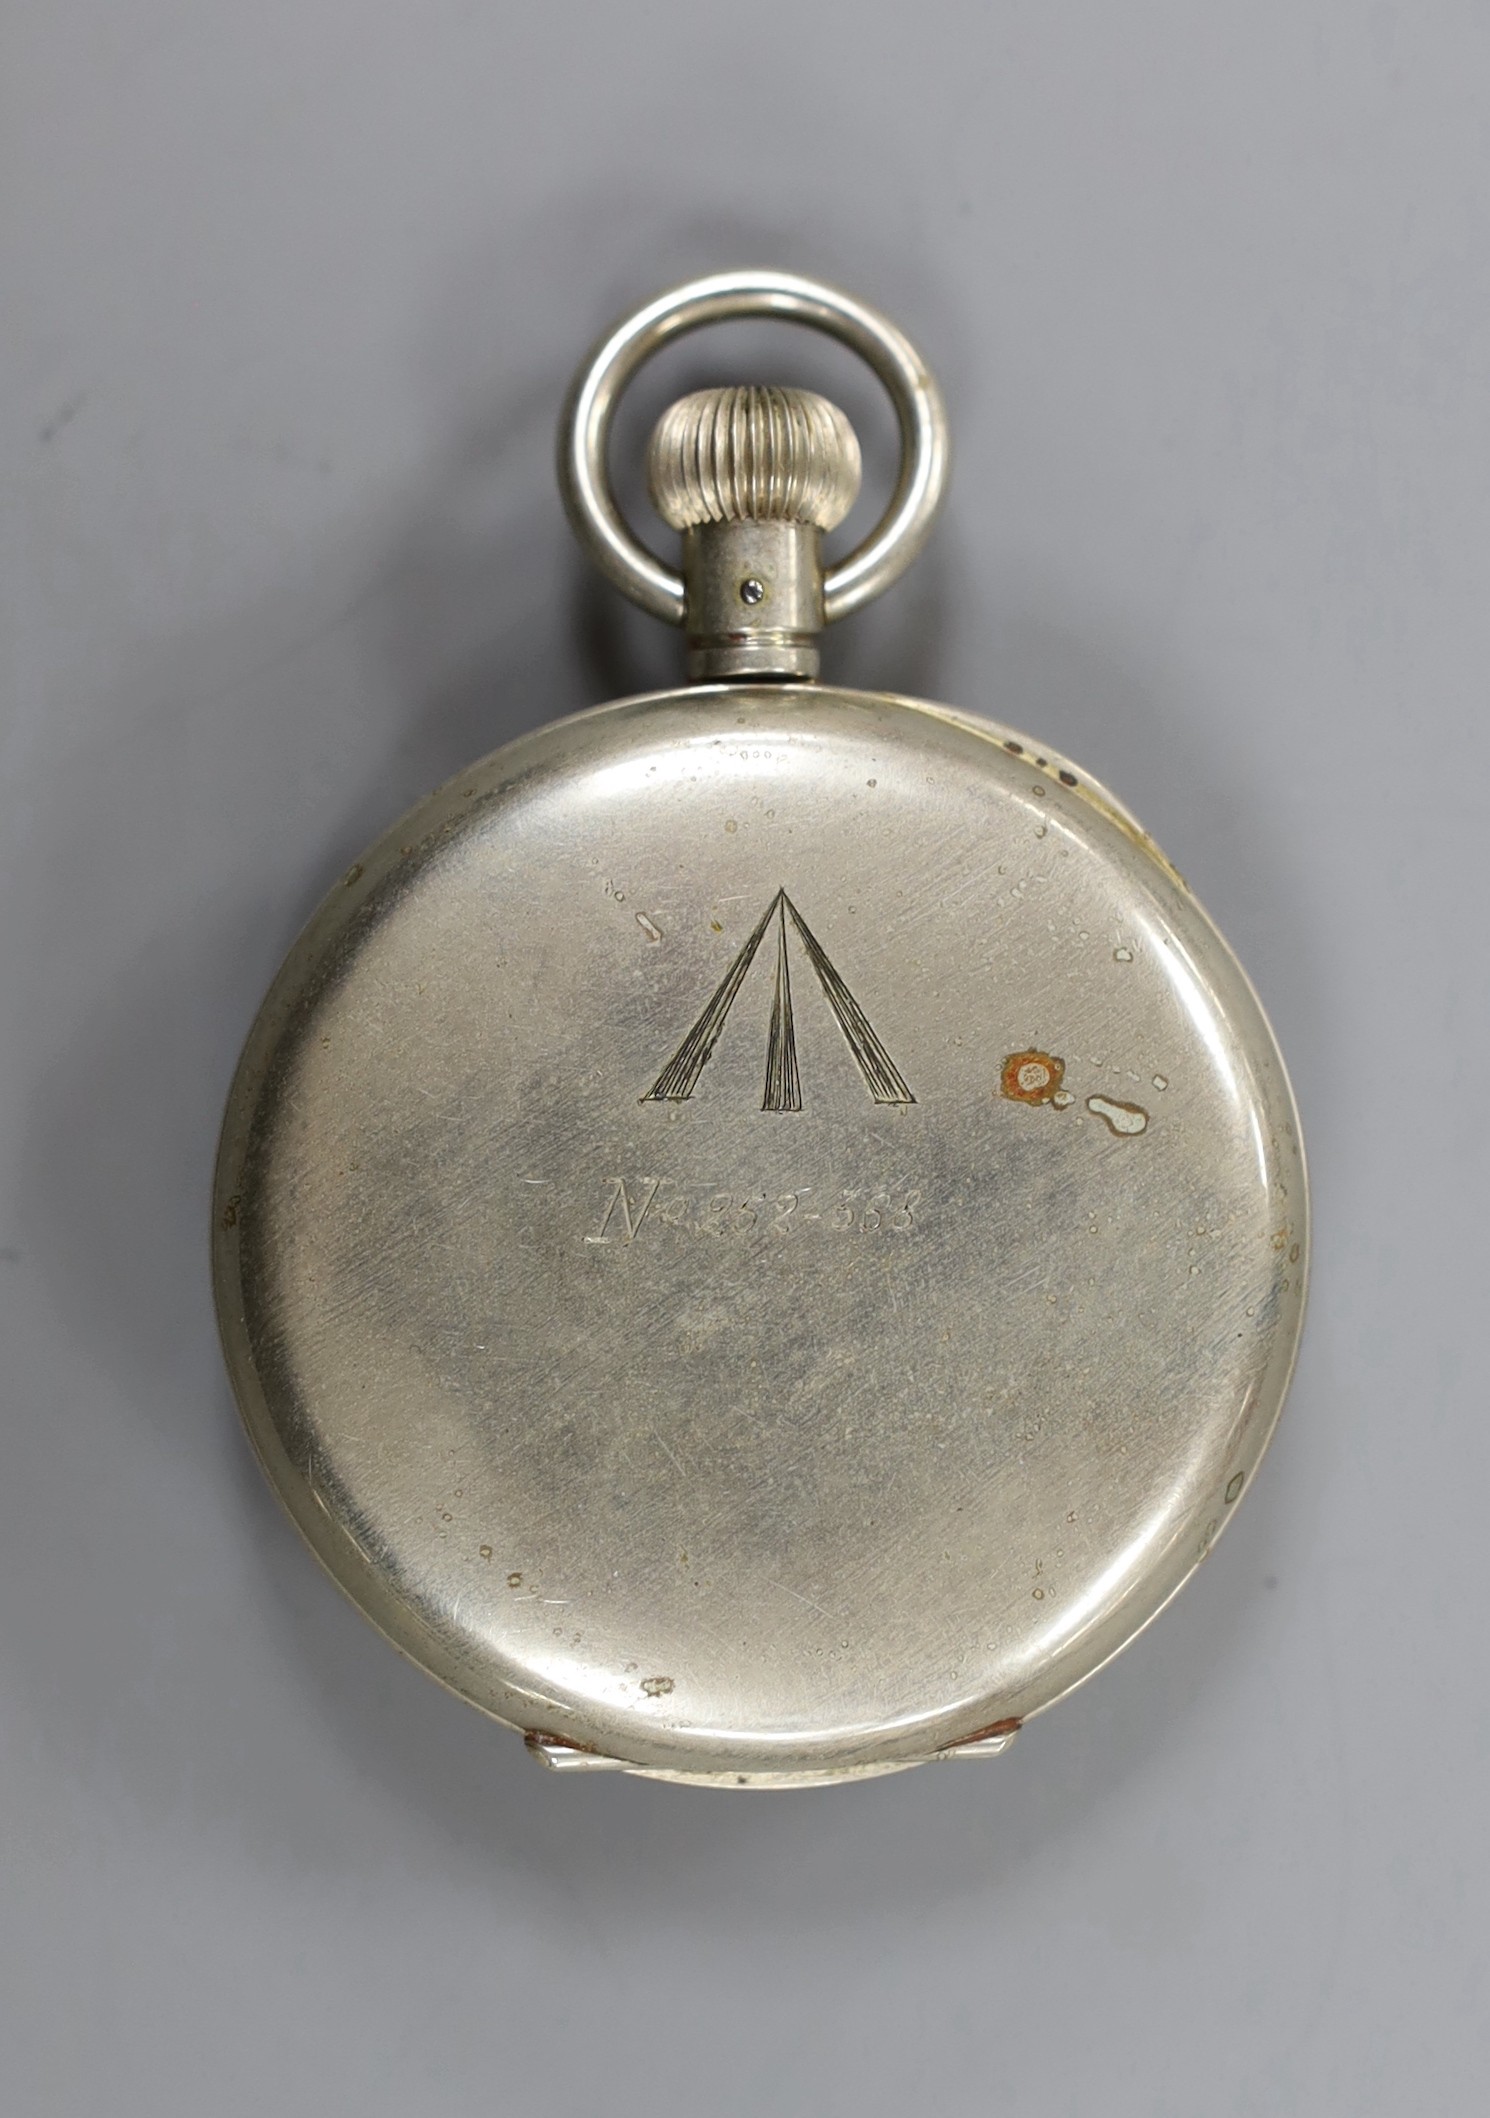 A cased military issue S. Smith & Son Ltd nickel cased chronoscope (chronograph), case back engraved with broad arrow and No. 252-368, case diameter 57mm